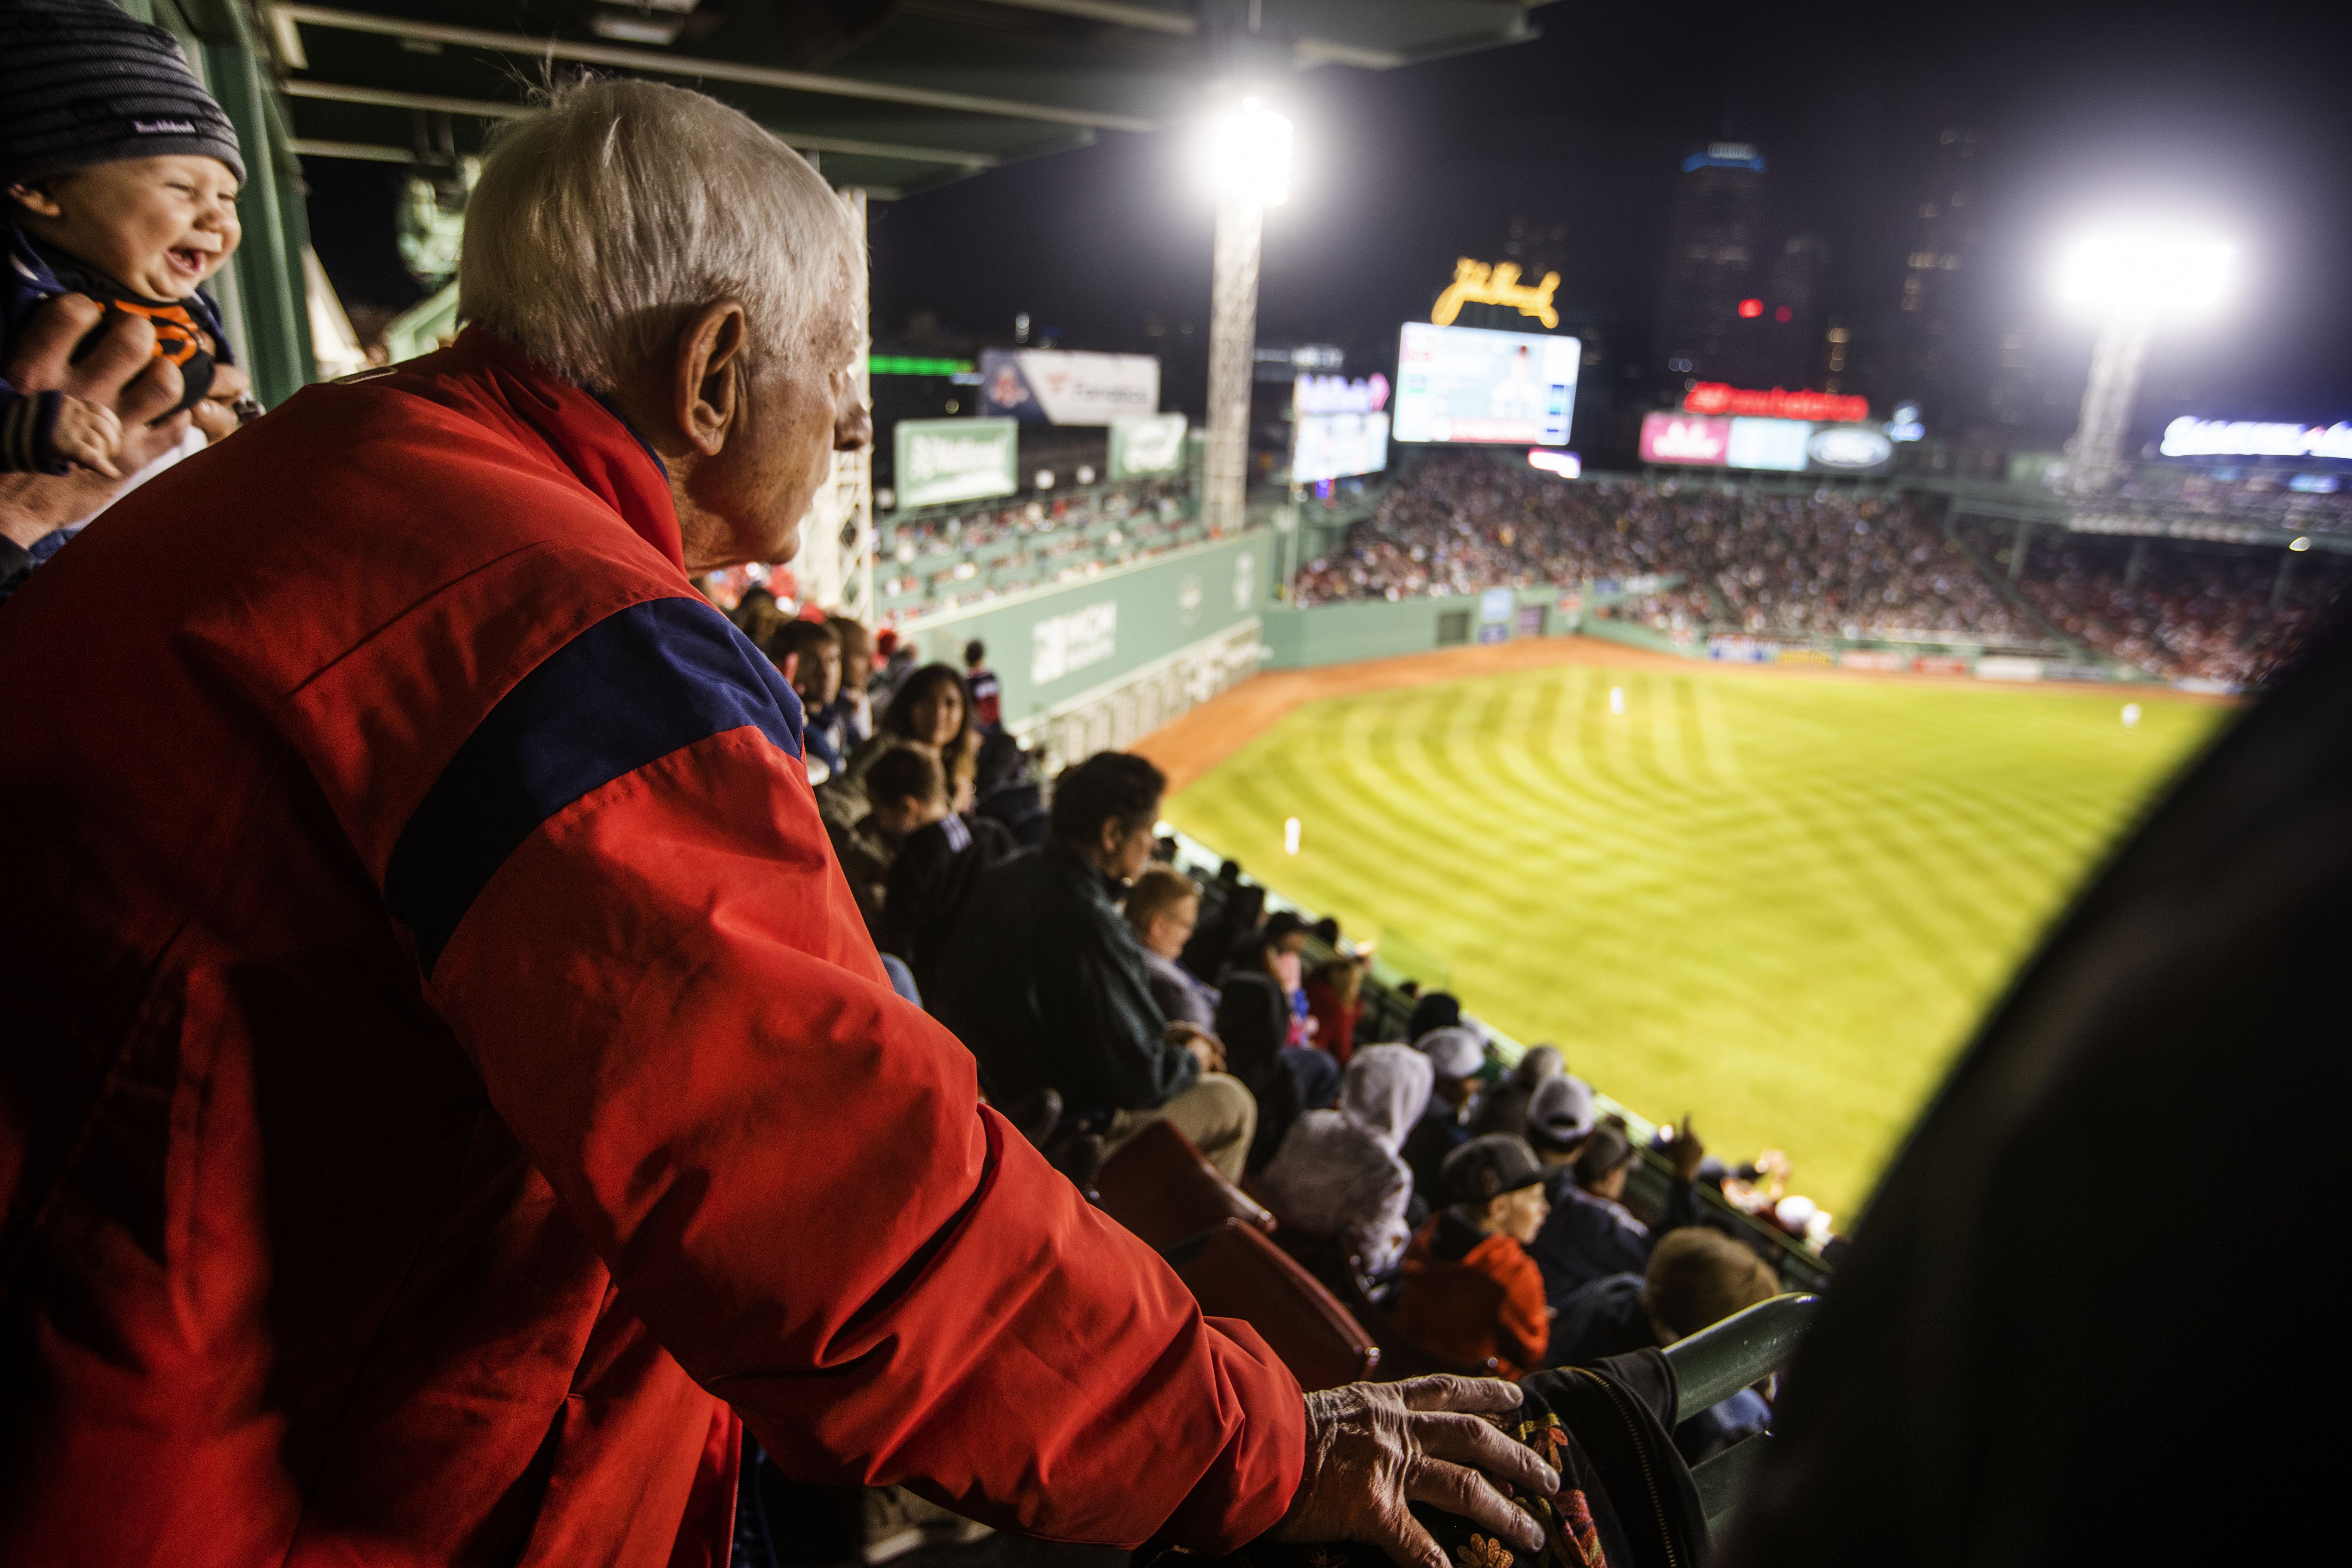 This Fenway series was a grand time for the Yastrzemskis - The